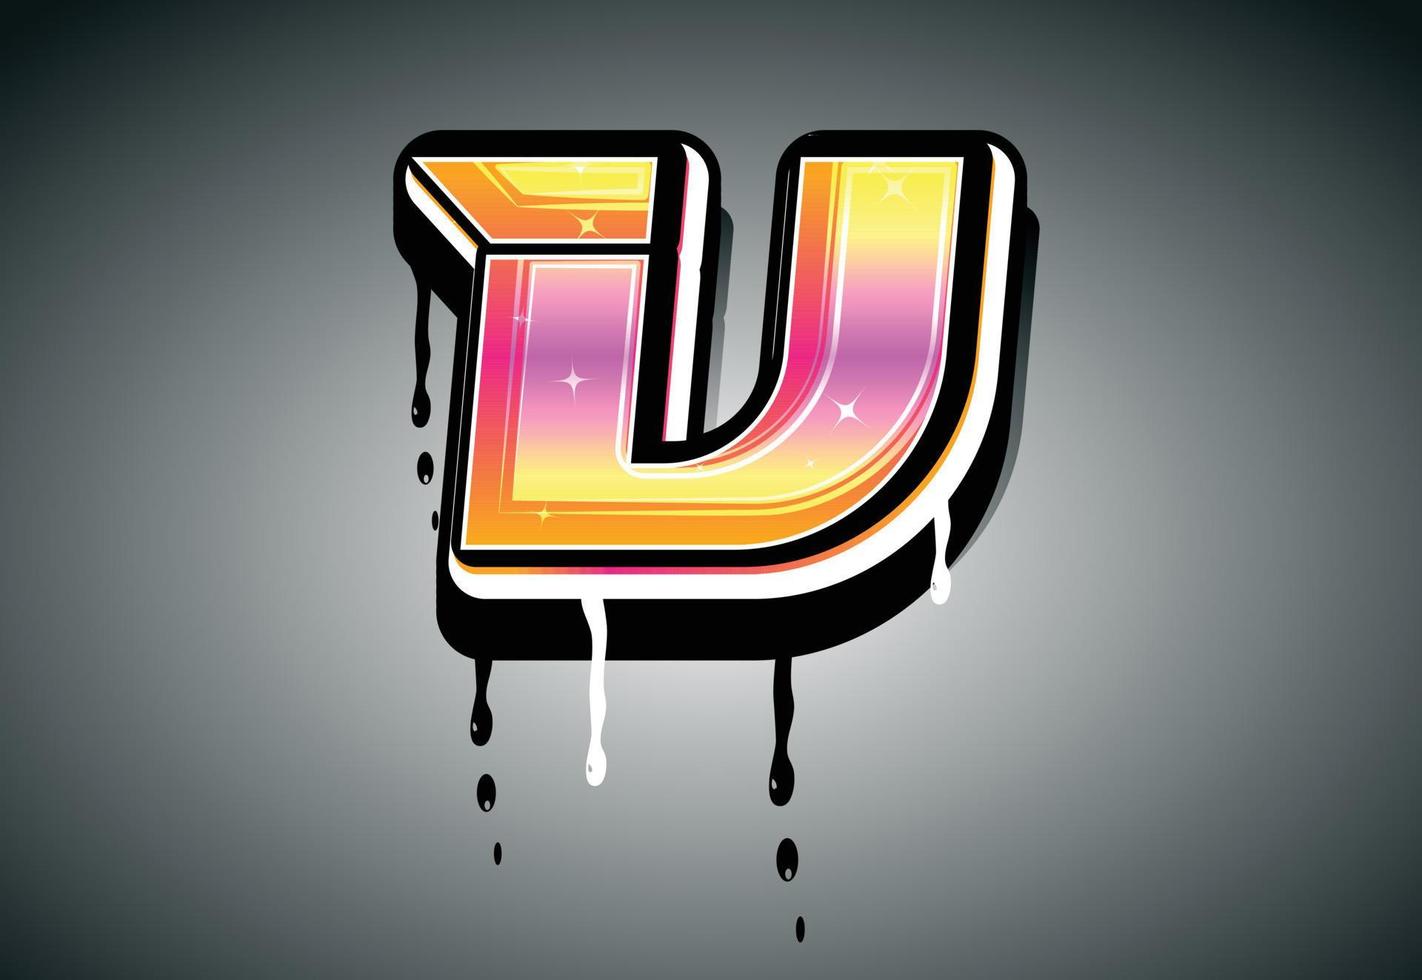 3D Letter graffiti with drip effect vector